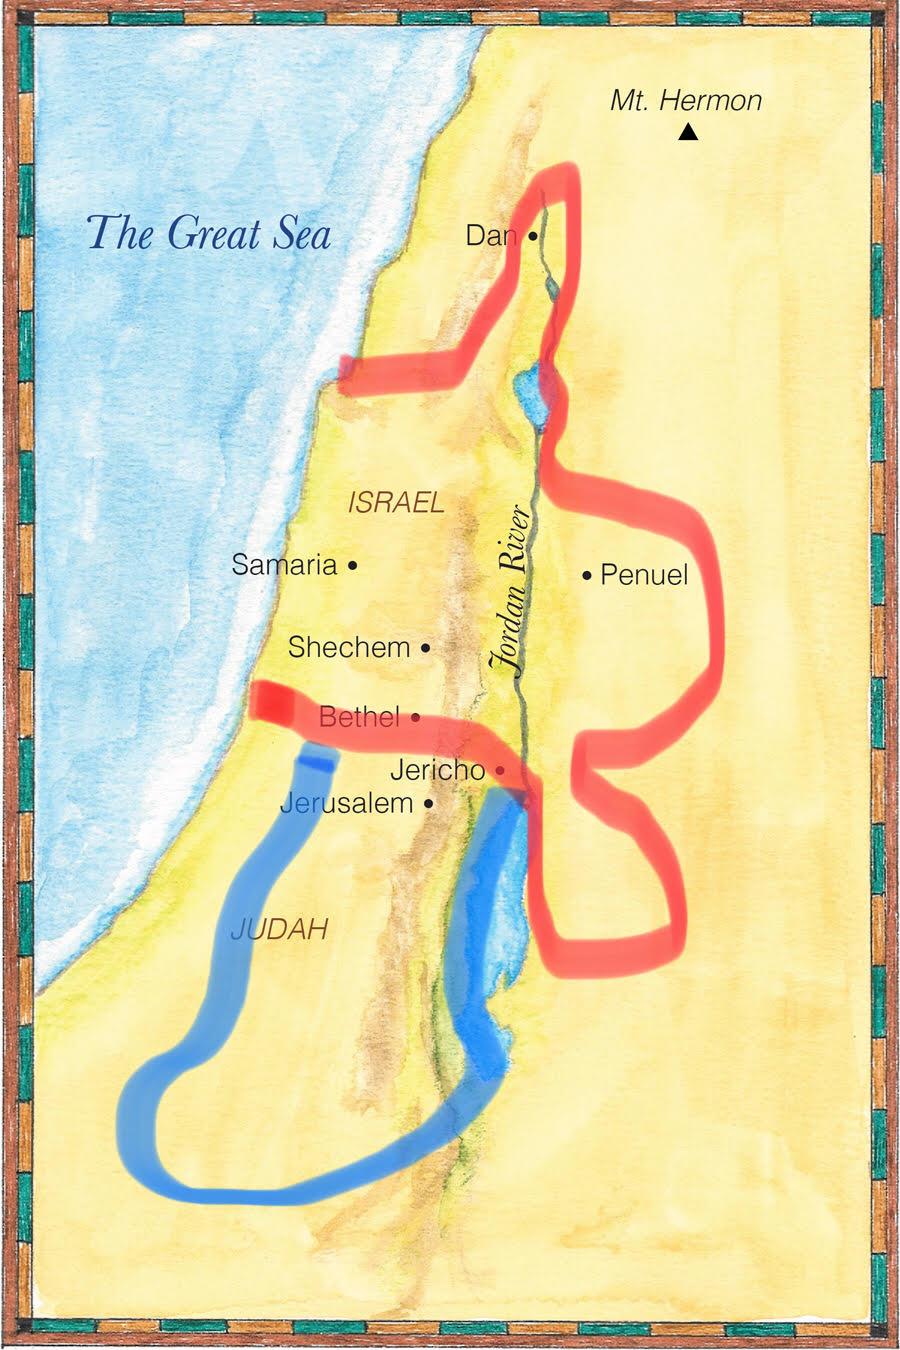 Northern Kingdom: ISRAEL King Jeroboam 10 or 11 Tribes Capital: Samaria Worship: Two Golden Calves Area: Dan to Bethel Existence: 211 years 20 Kings, none godly Southern